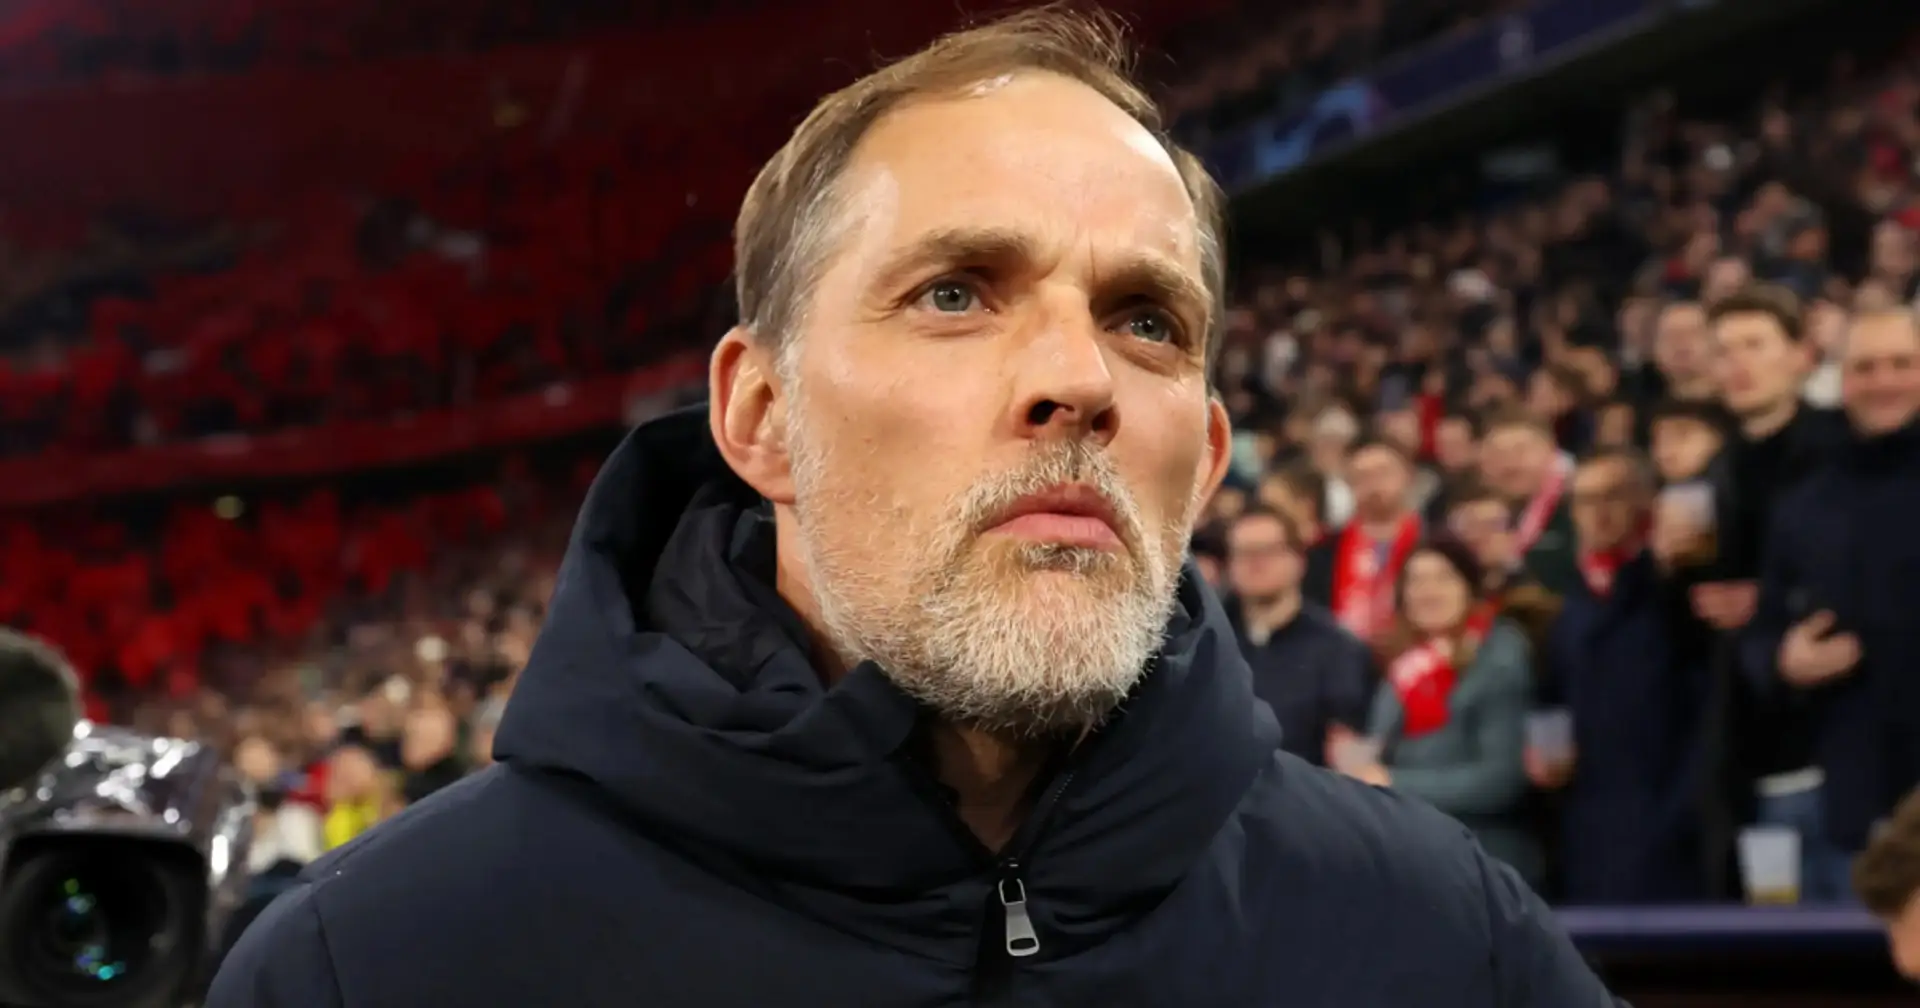 Thomas Tuchel open to Chelsea return & 3 more big stories you might've missed